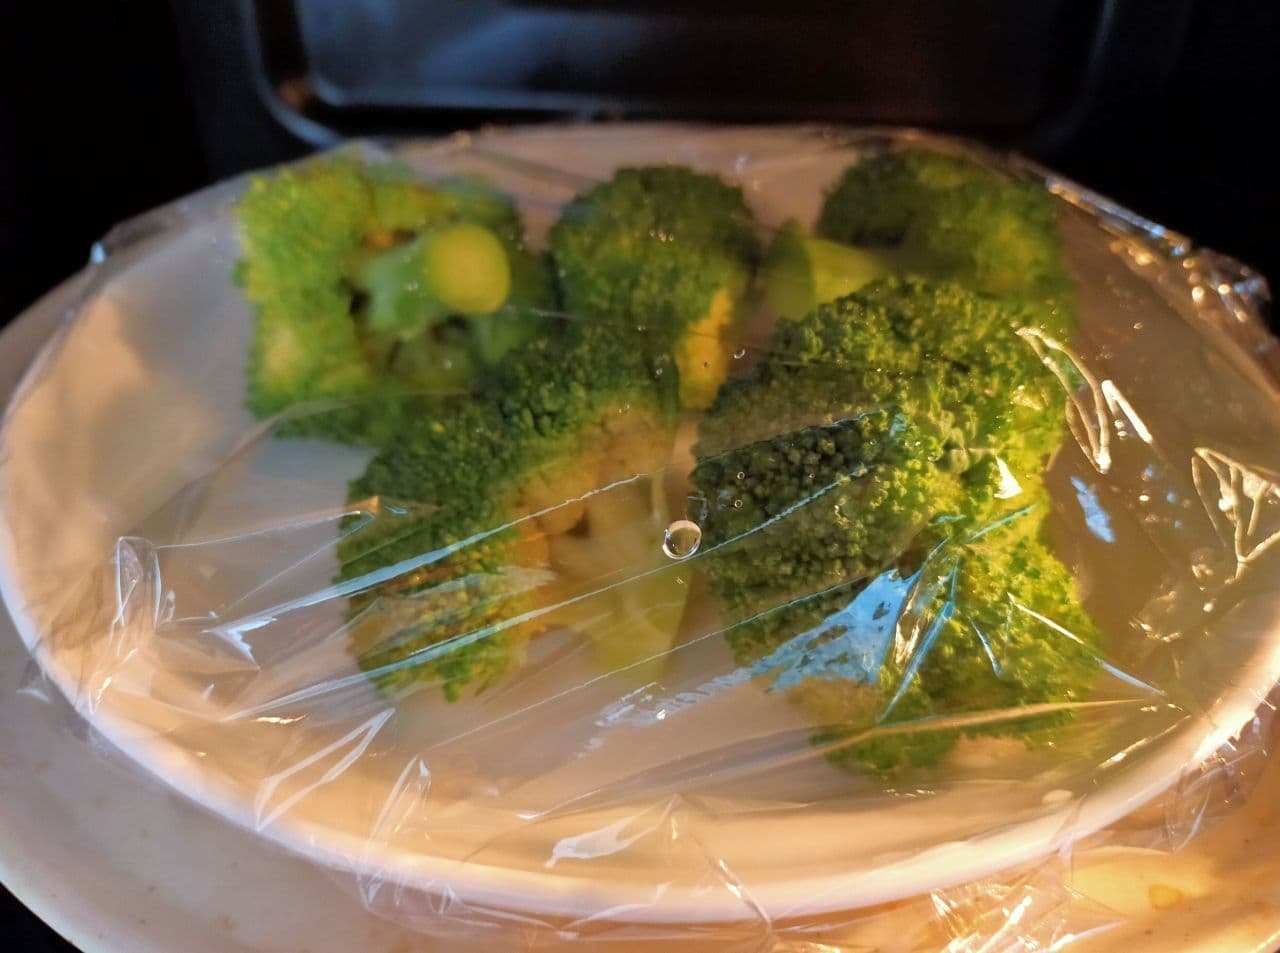 Step 3: How to Steam Broccoli in the Microwave